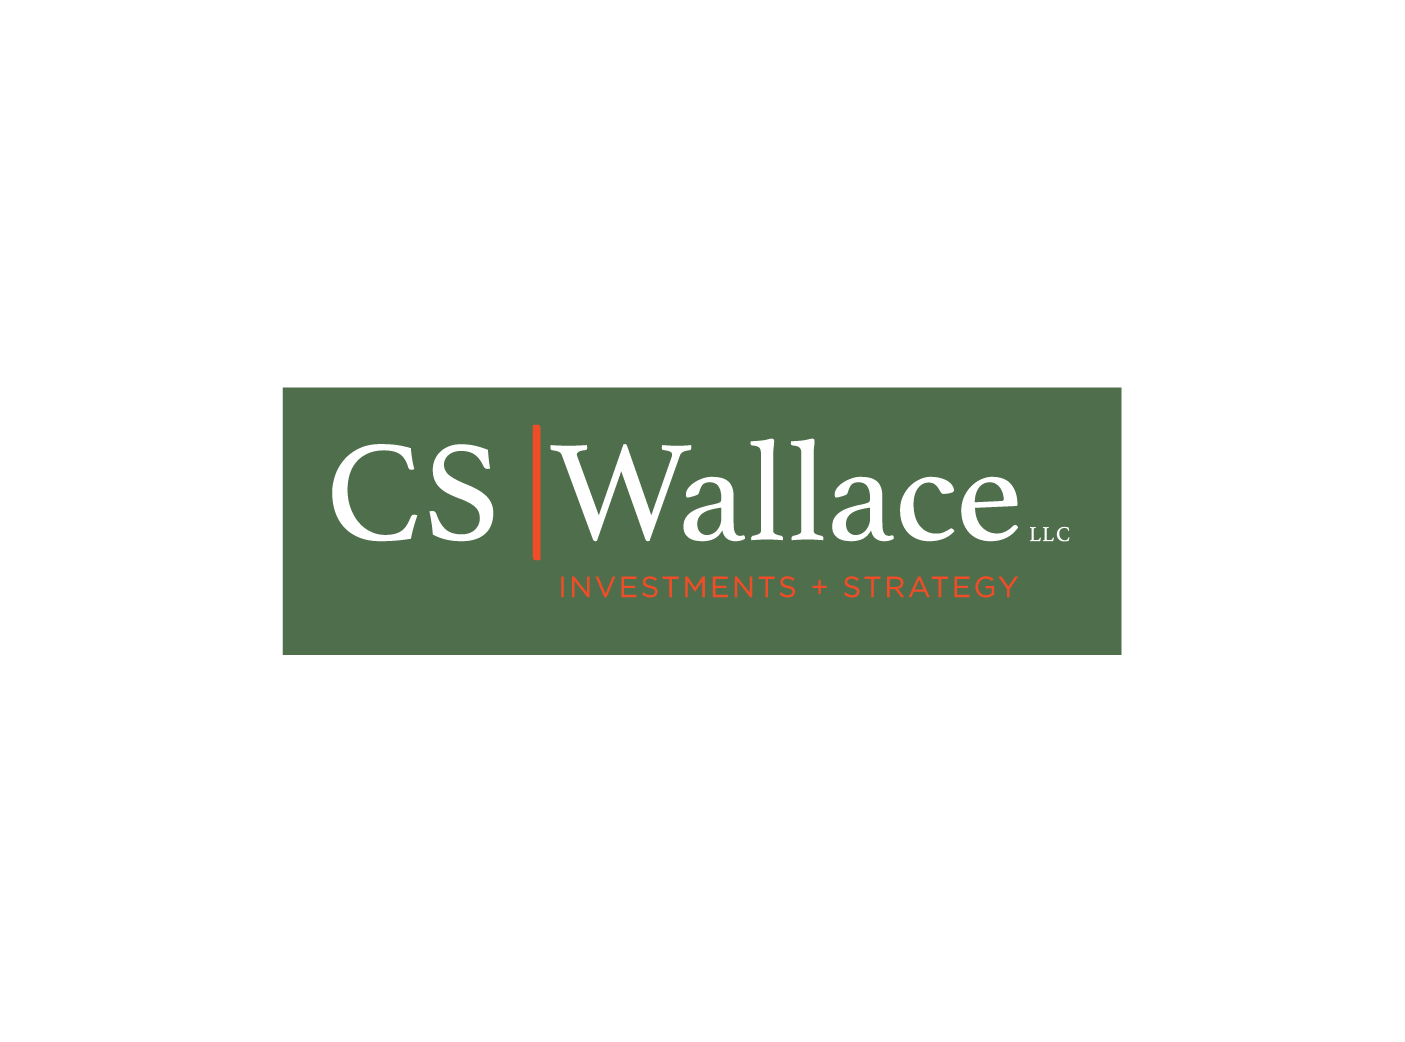 CSWallace-337